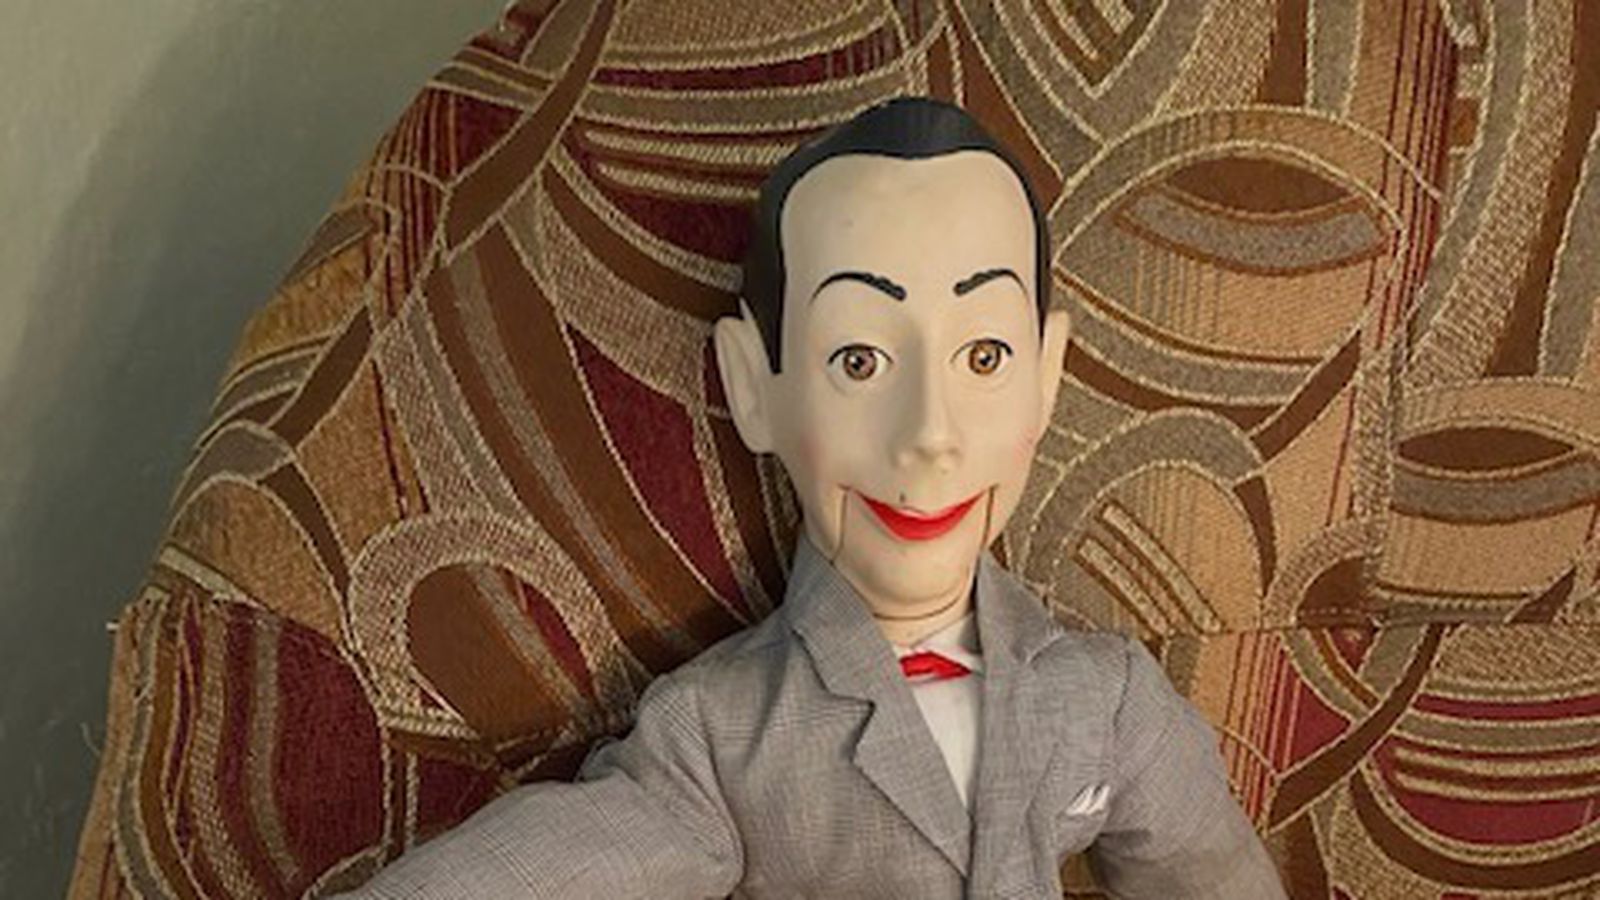 How A Pee Wee Herman Doll Came To The Rescue During Tough Times